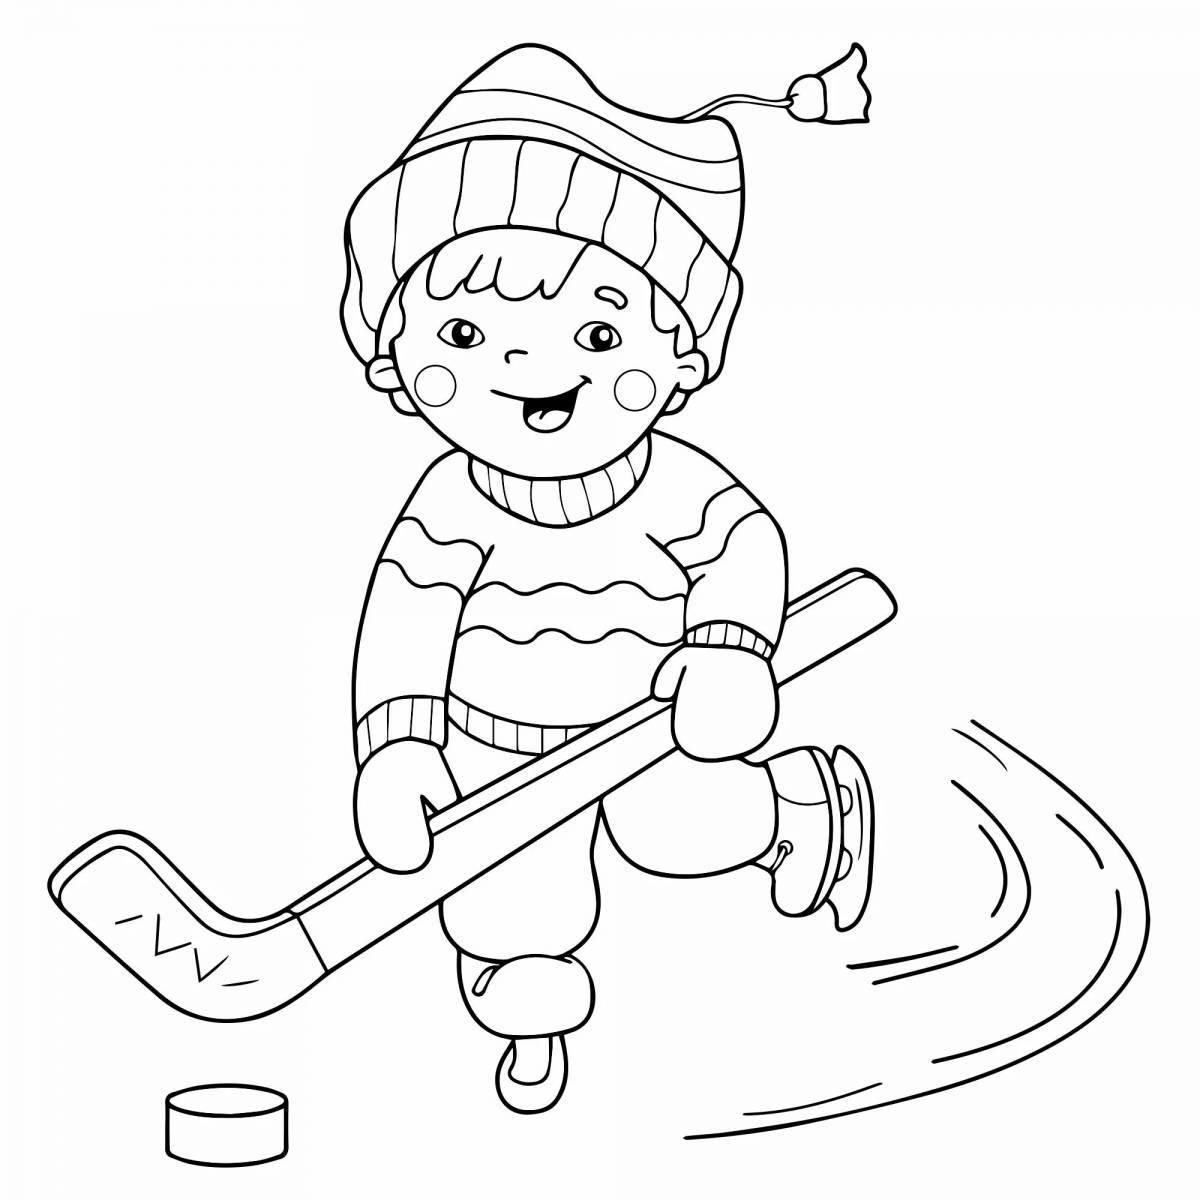 Wonderful winter sports coloring book